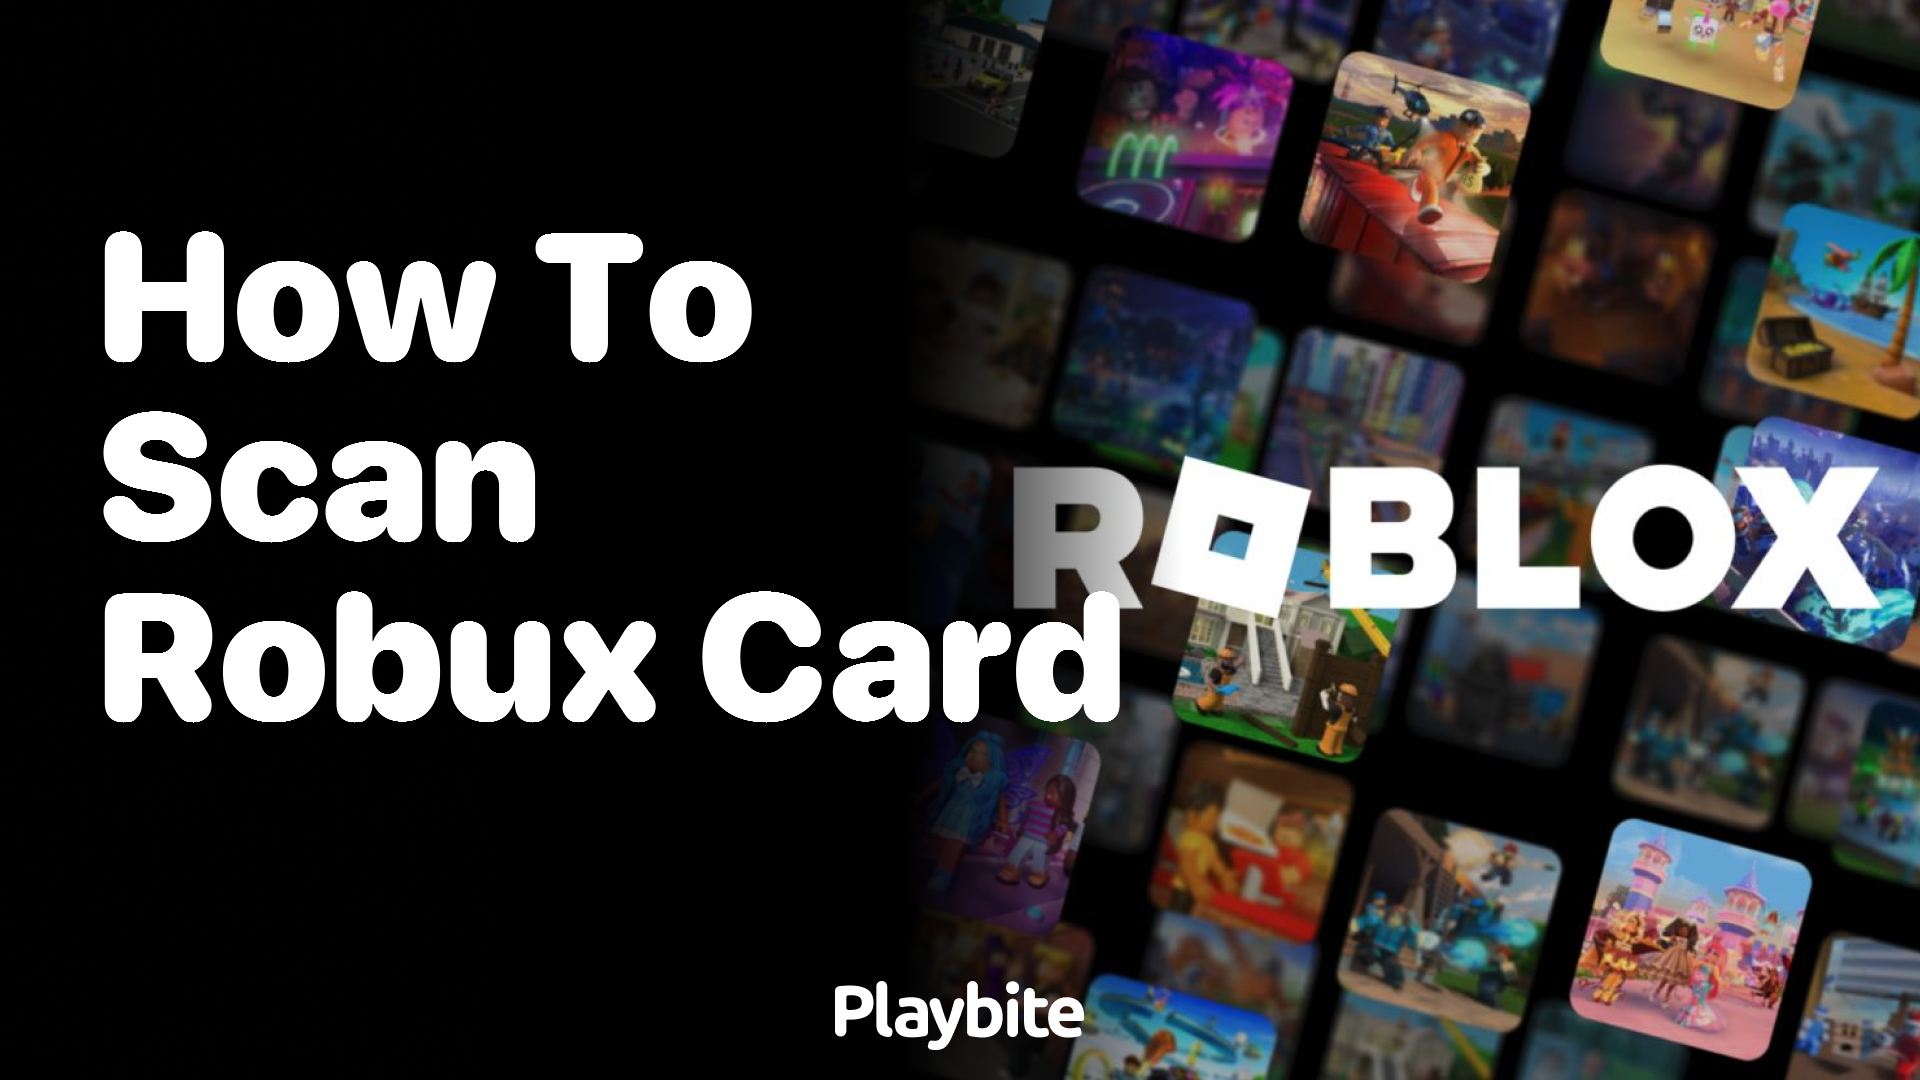 How to Scan a Robux Card: A Quick Guide